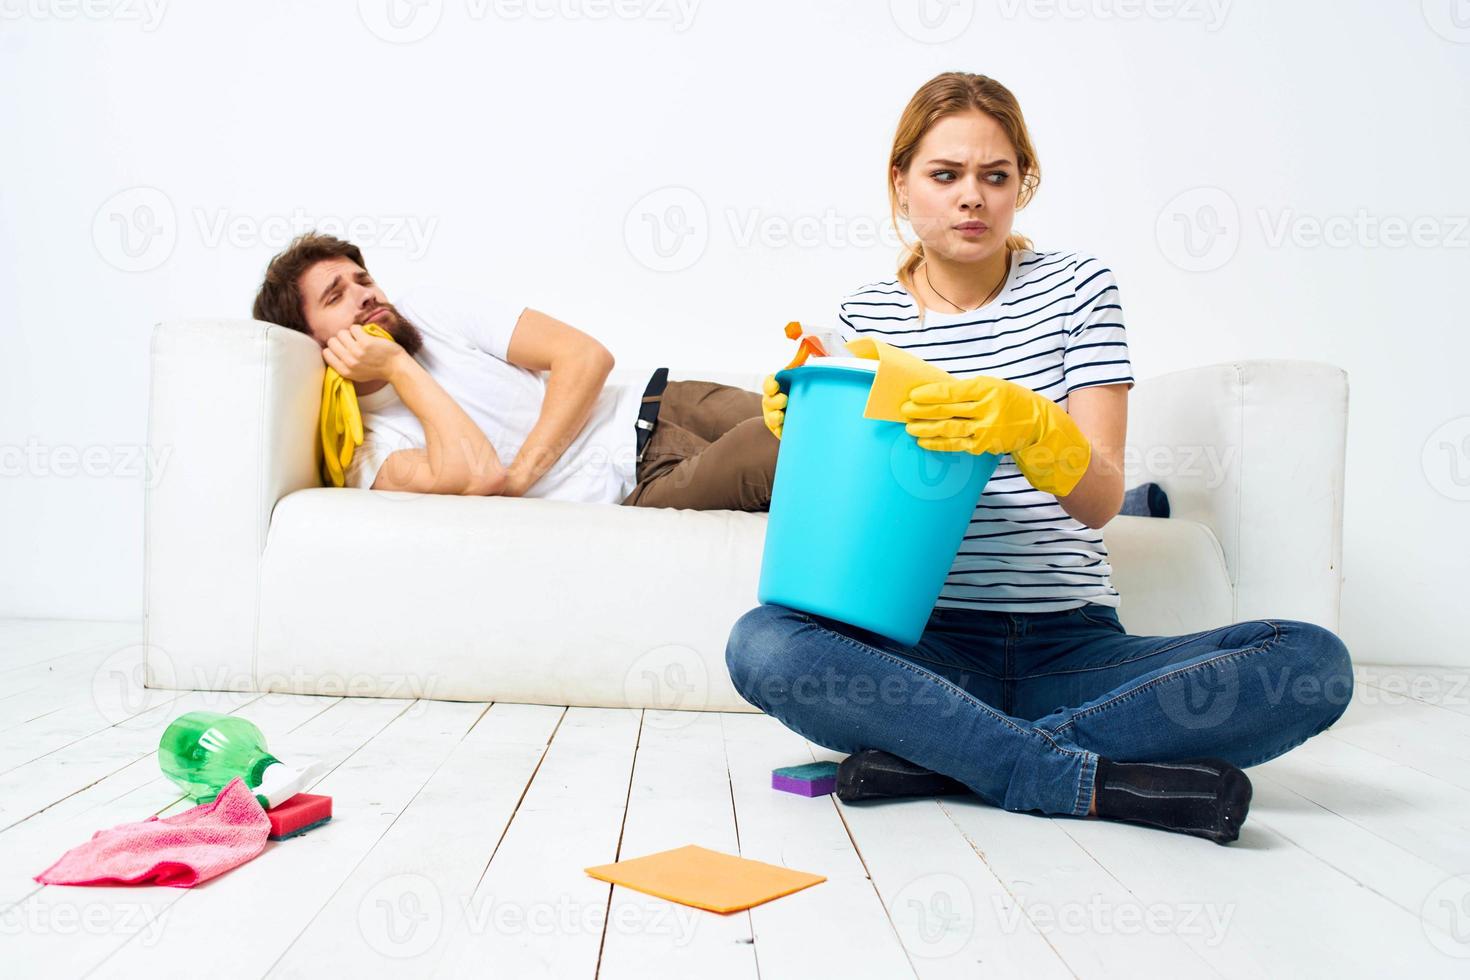 Married couple joint cleaning house cleaning supplies lifestyle photo